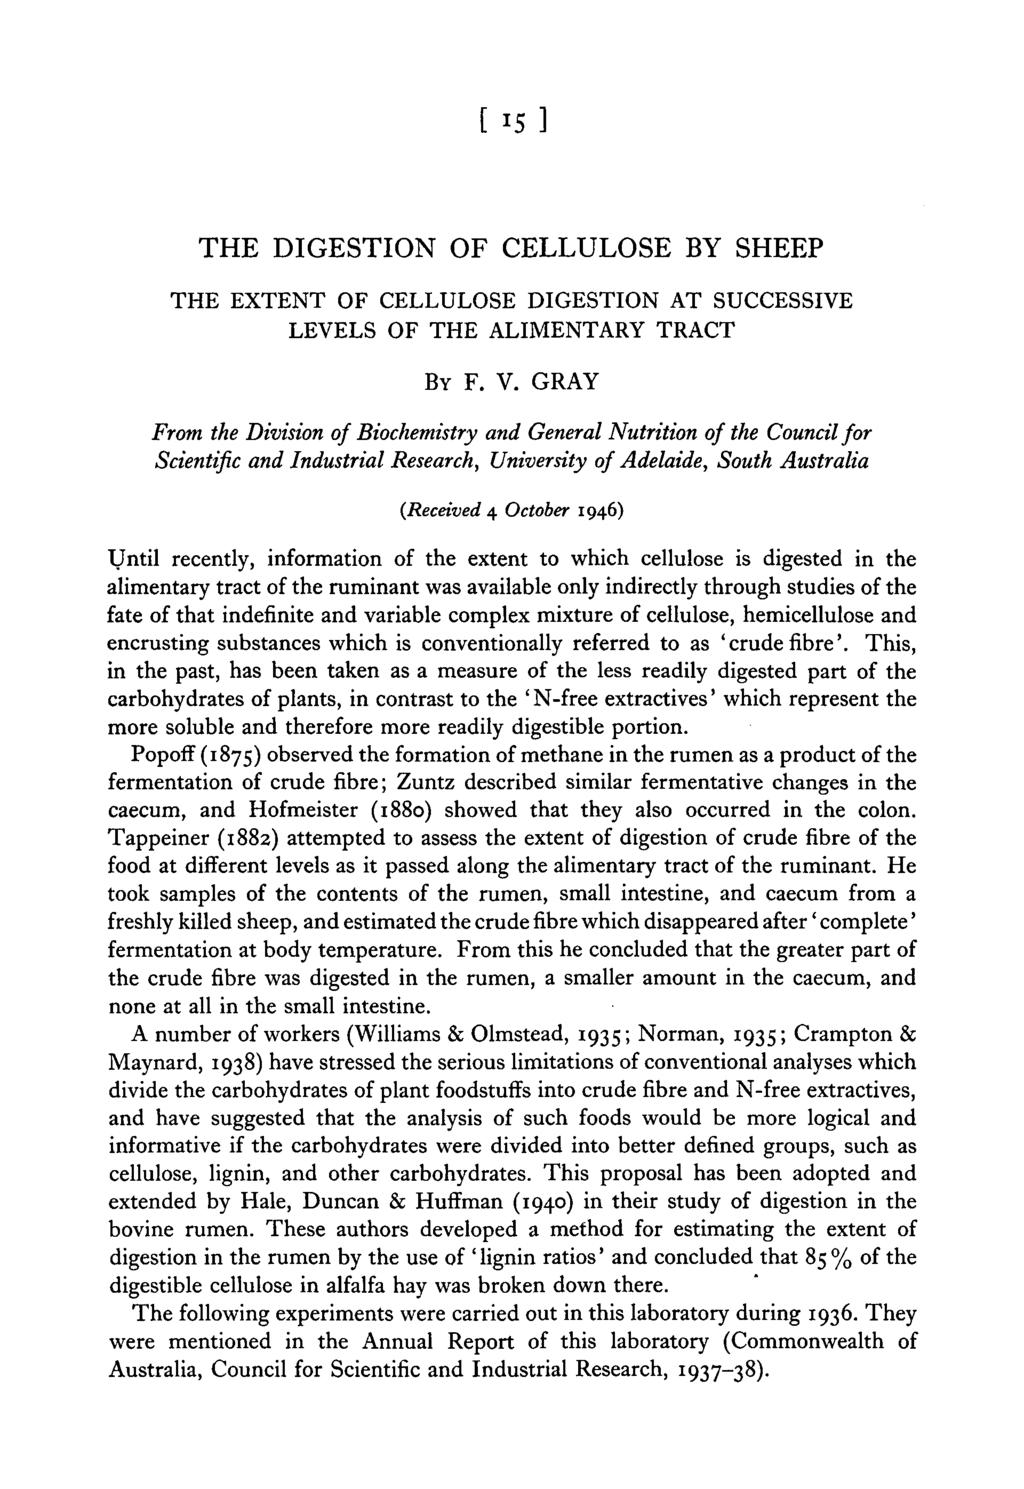 THE DIGESTION OF CELLULOSE BY SHEEP THE EXTENT OF CELLULOSE DIGESTION AT SUCCESSIVE LEVELS OF THE ALIMENTARY TRACT BY F. V.